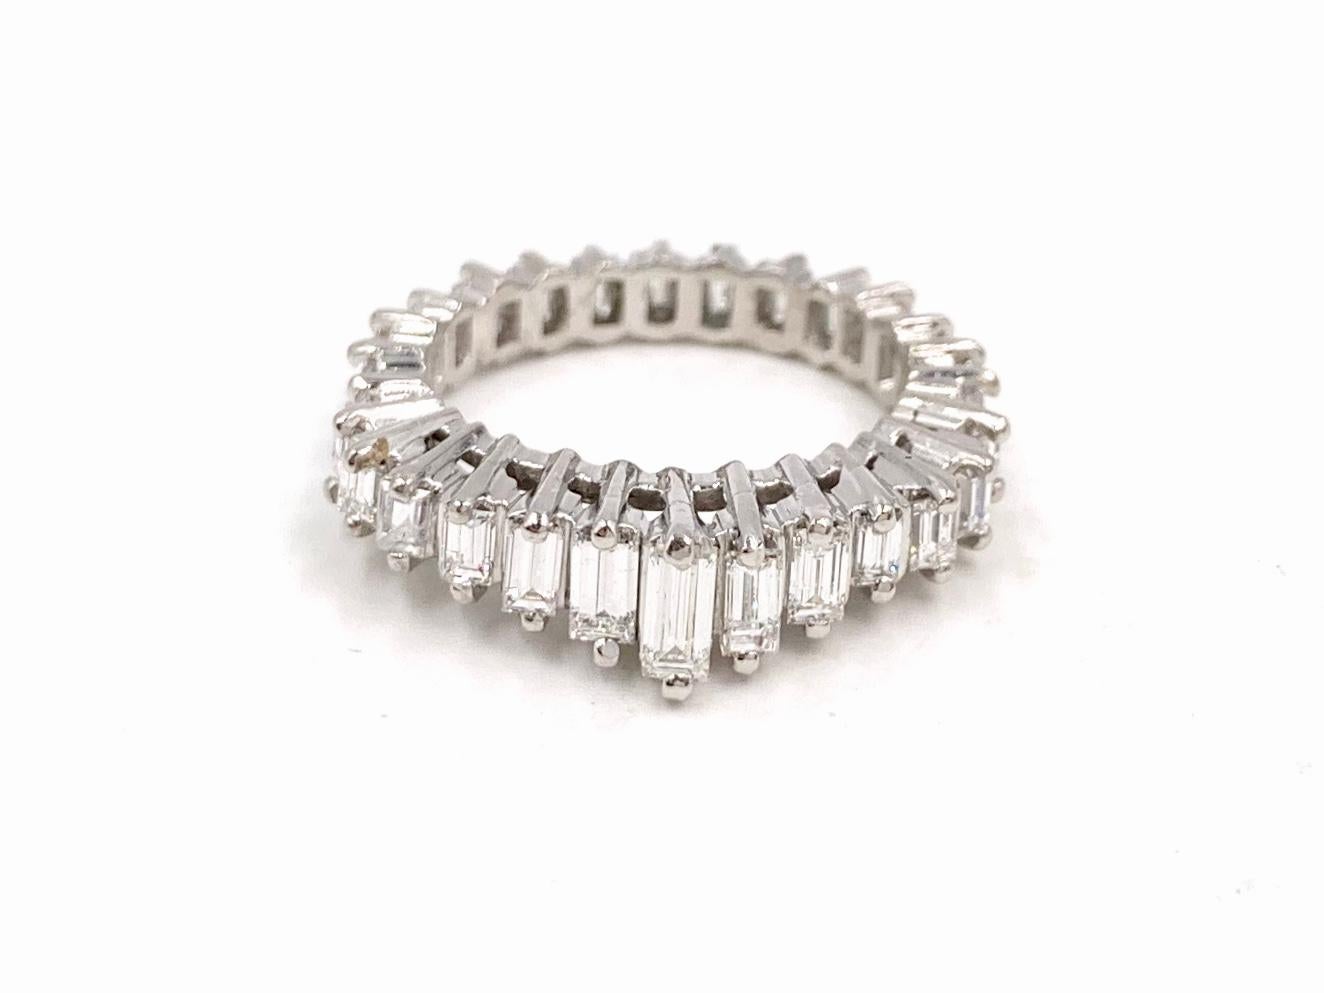 A fashionable and well made platinum eternity band featuring 1.79 carats of graduated  baguette diamonds. Diamond quality is approximately G color, VS2-SI1 clarity. Diamonds are set in individual baskets with a prong at north and south. Width of